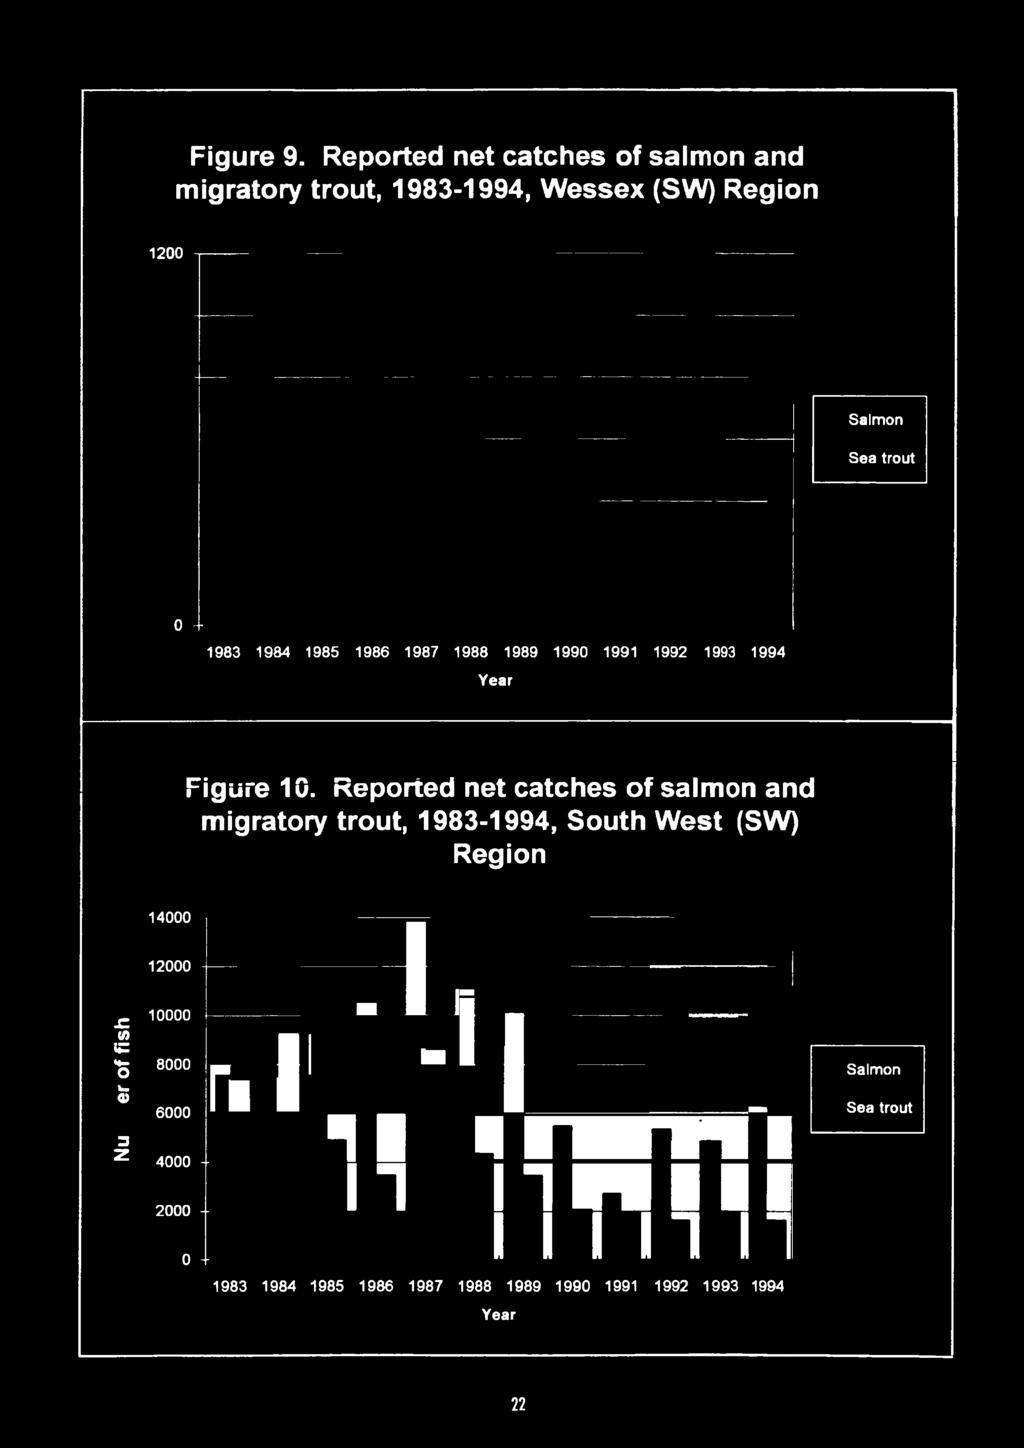 Reported net catches of salmon and migratory trout, 1983-1994, South West (SW)